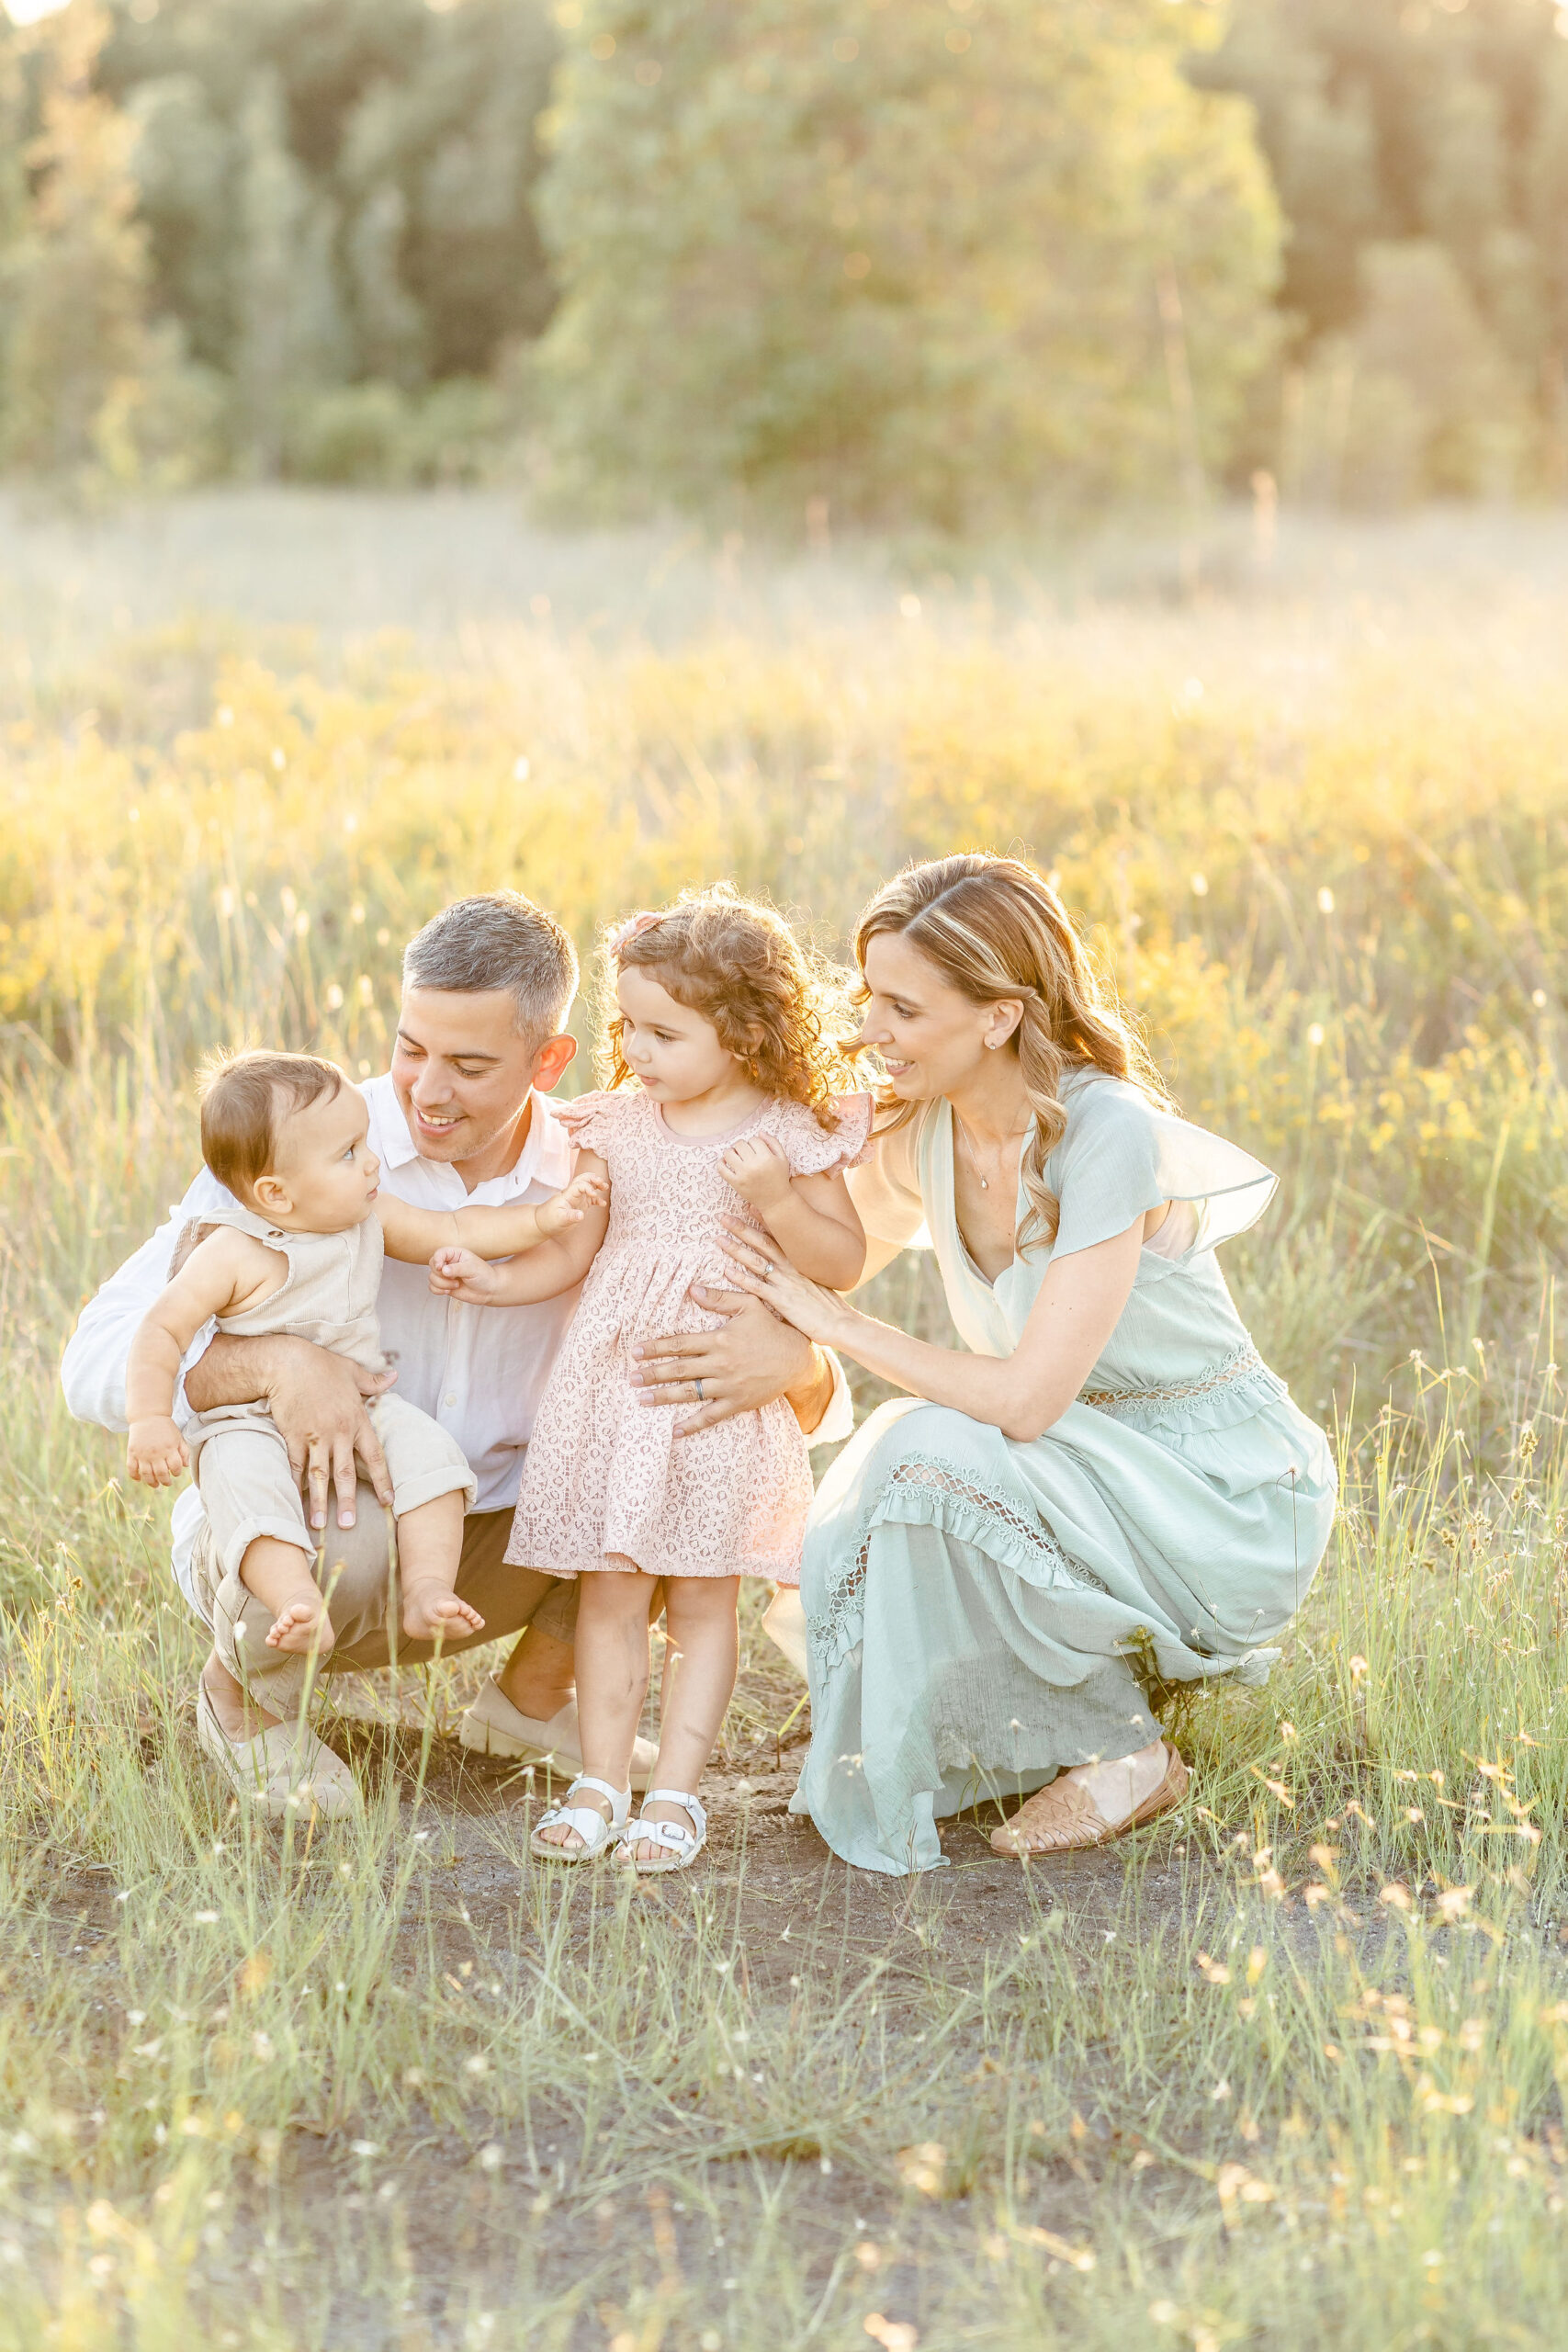 A mother and father play and explore with their toddler daughter and infant son in a field of tall grass at sunset